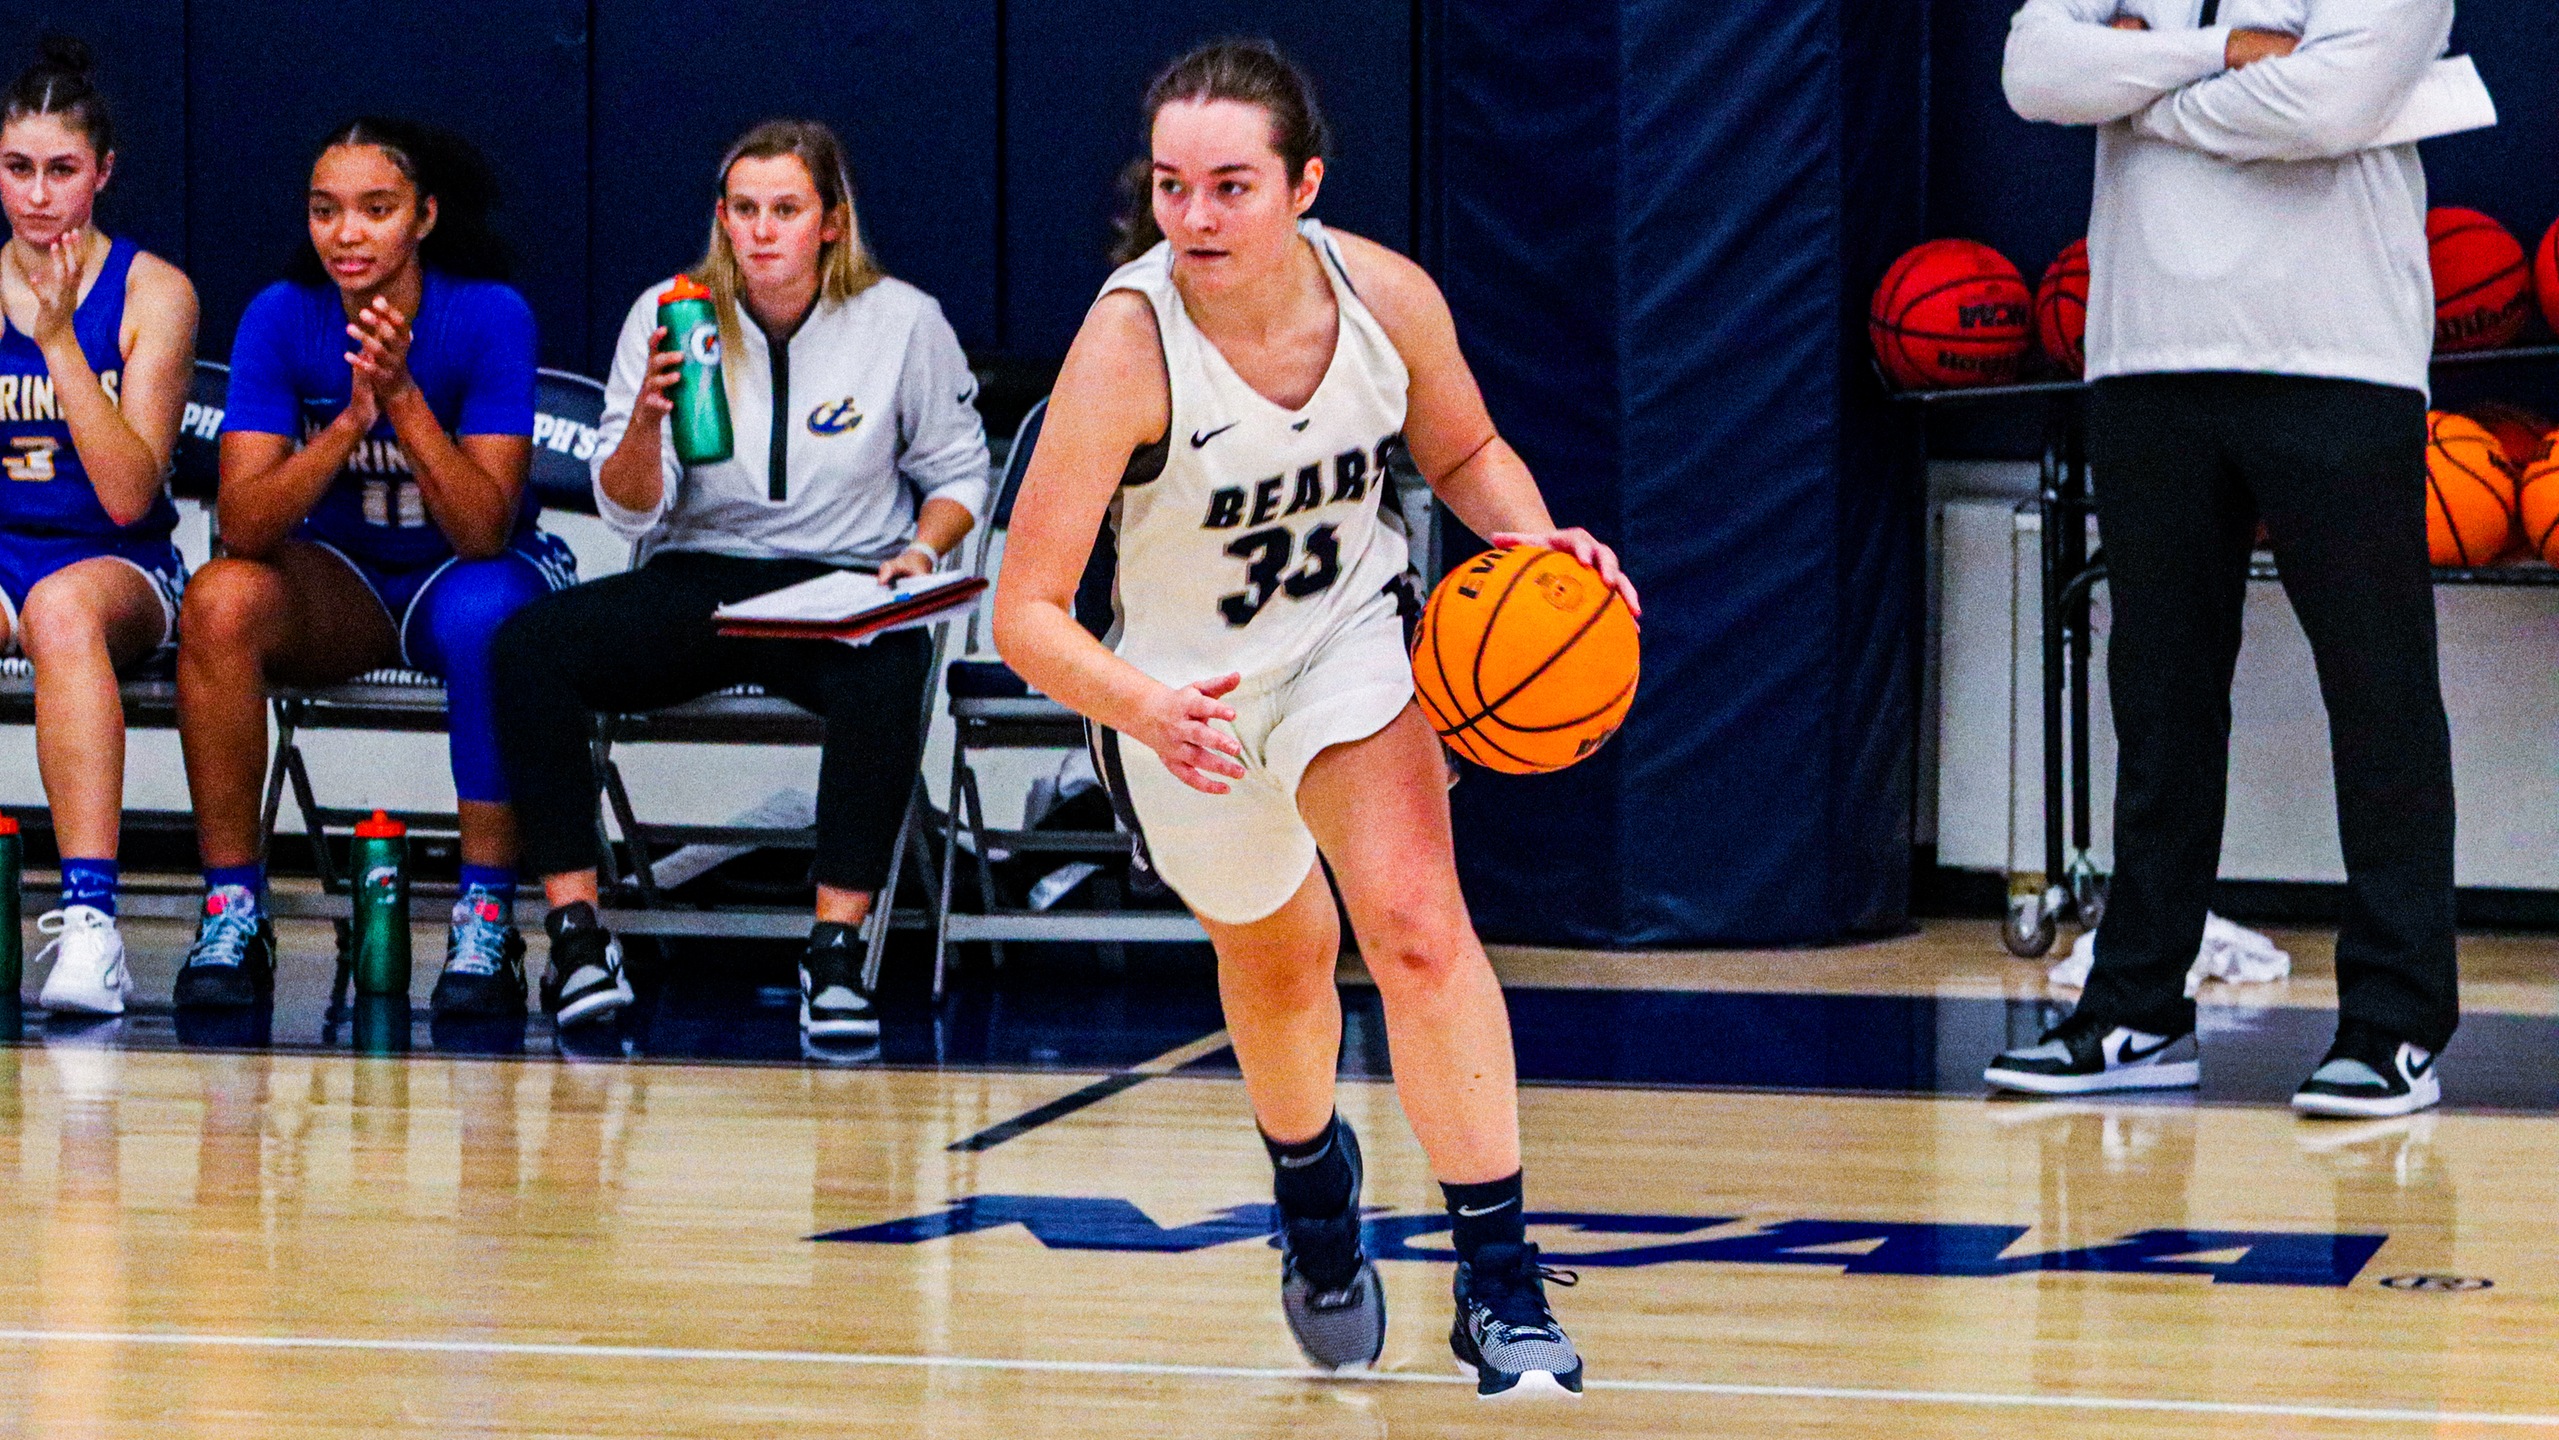 Women’s Basketball Drops First Game of Season to Maine Maritime